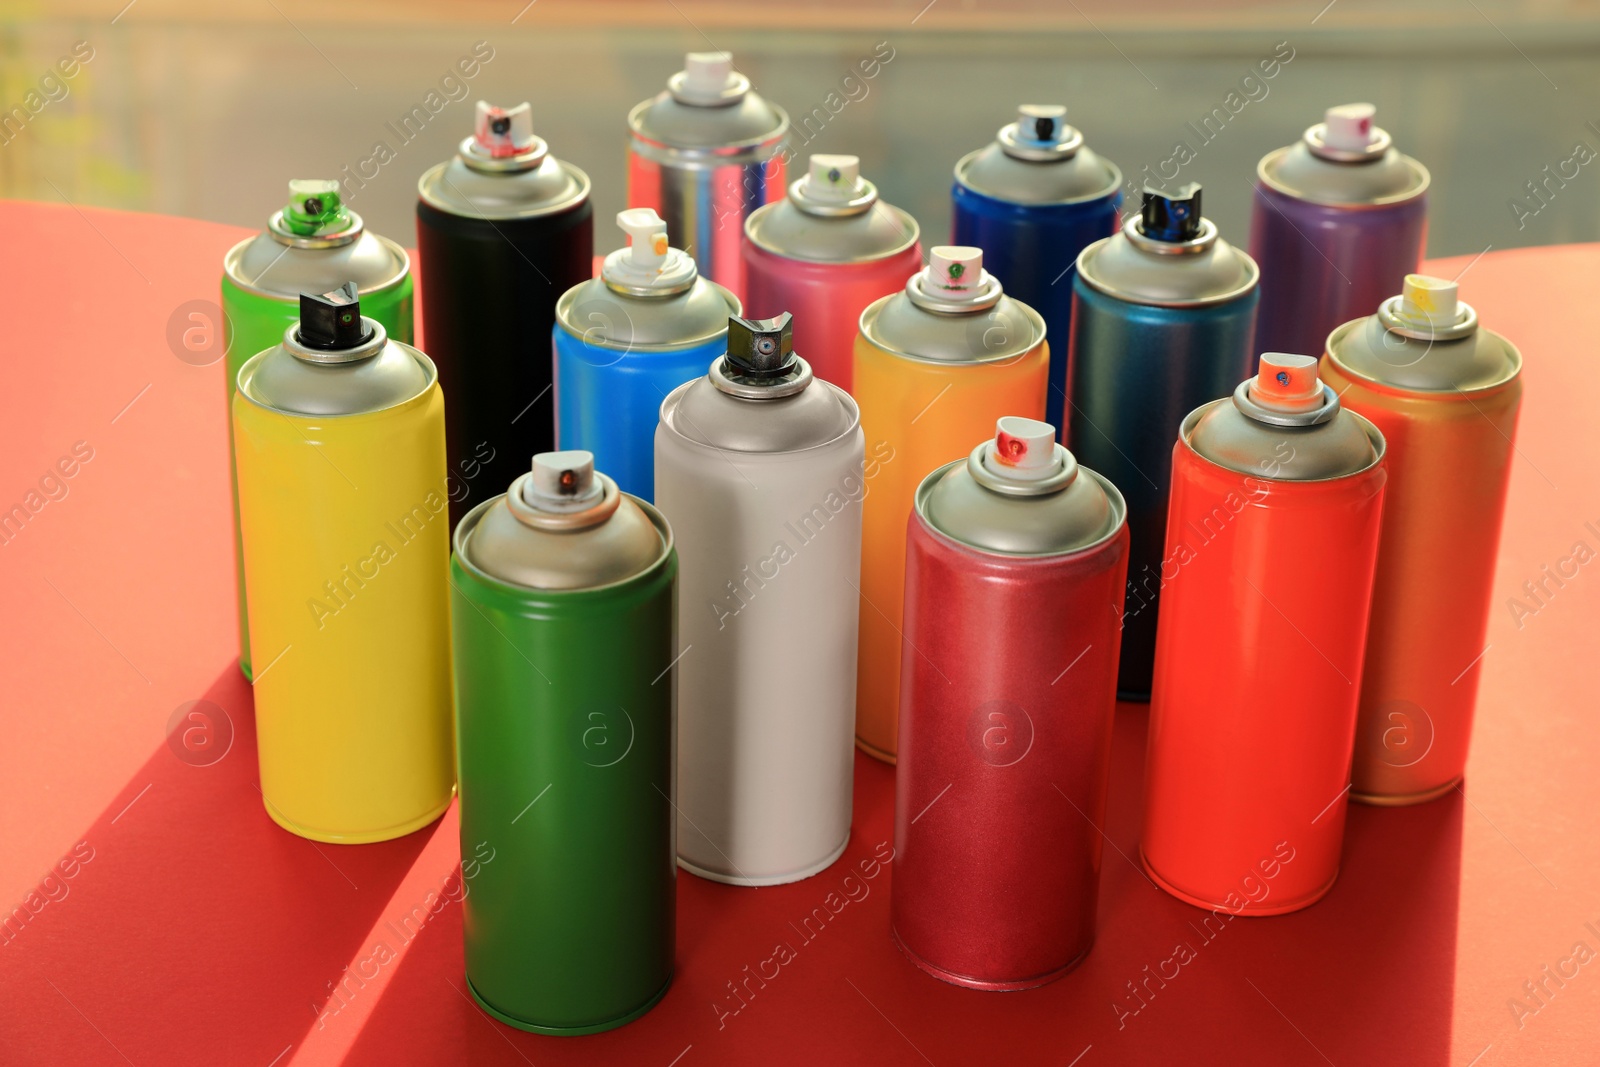 Photo of Cans of different graffiti spray paints on red table near window